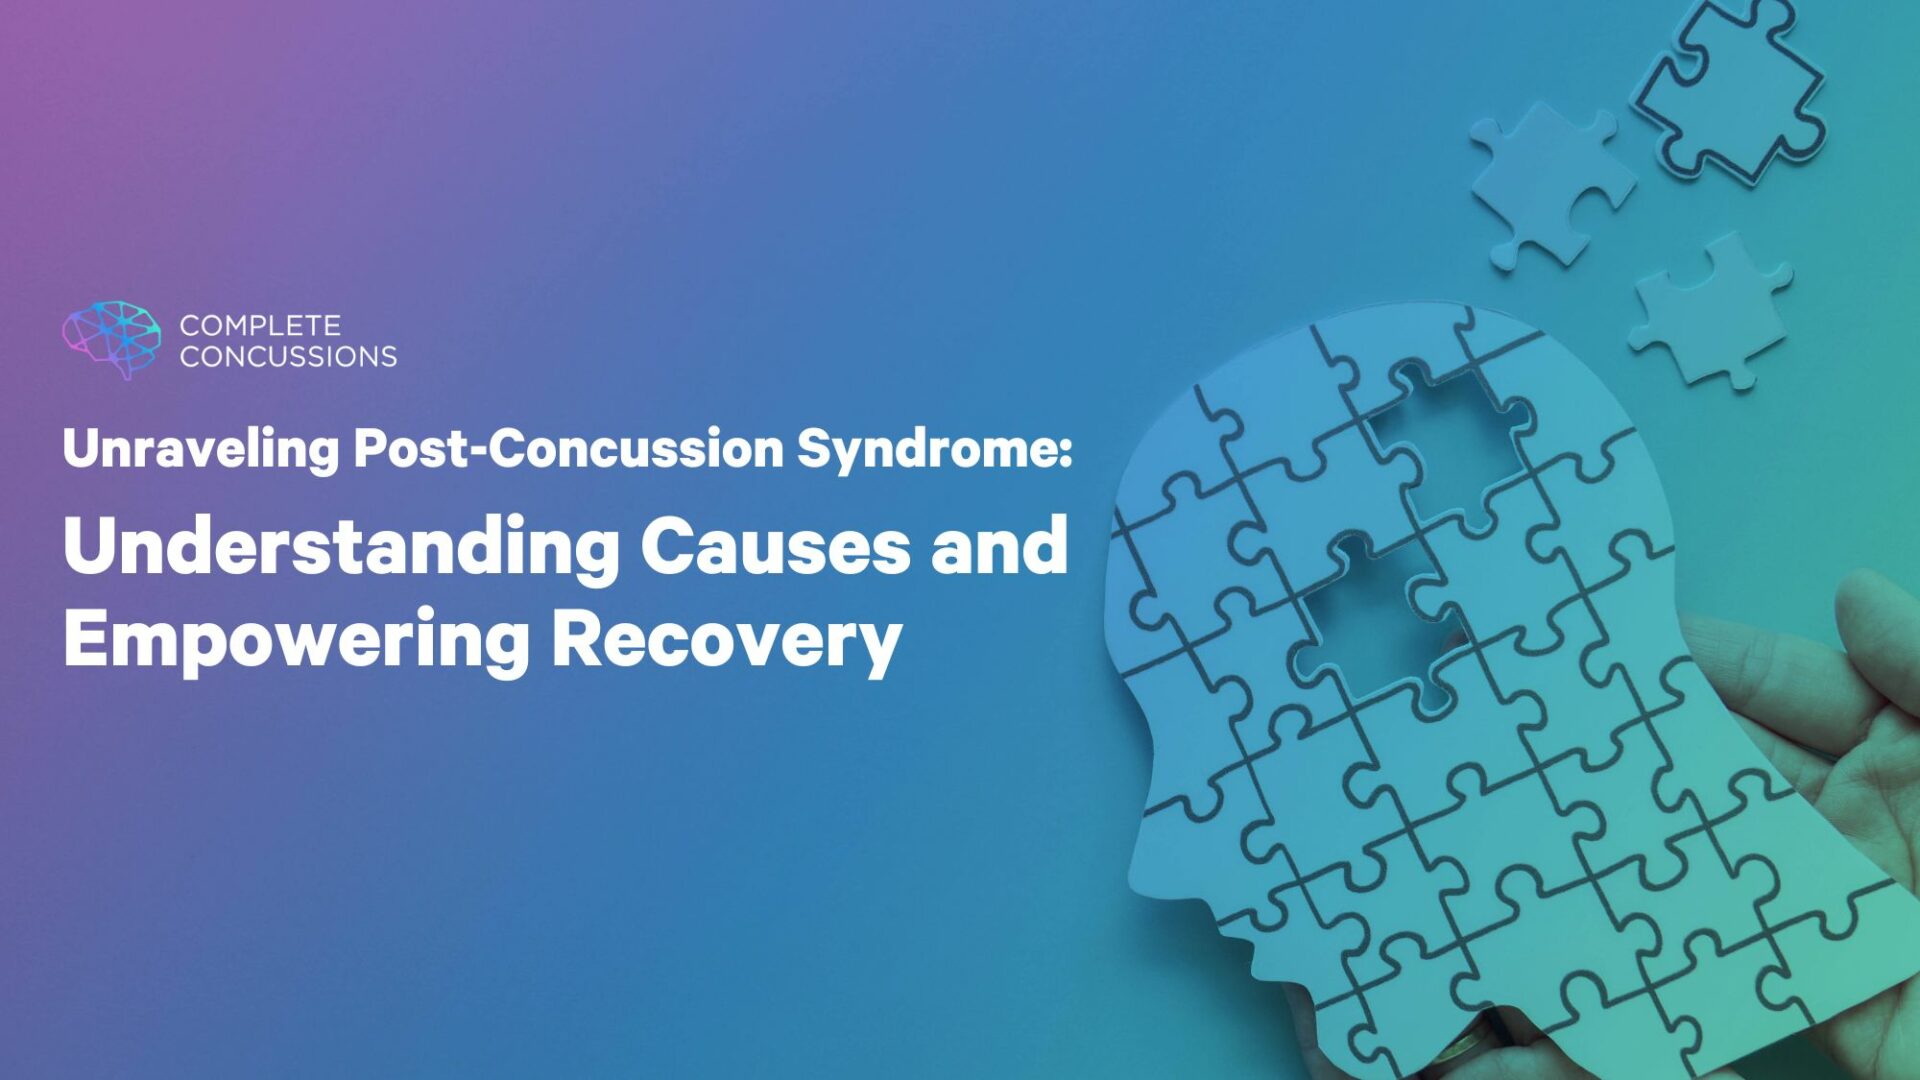 Unraveling Post-Concussion Syndrome: Understanding Causes and Empowering Recovery